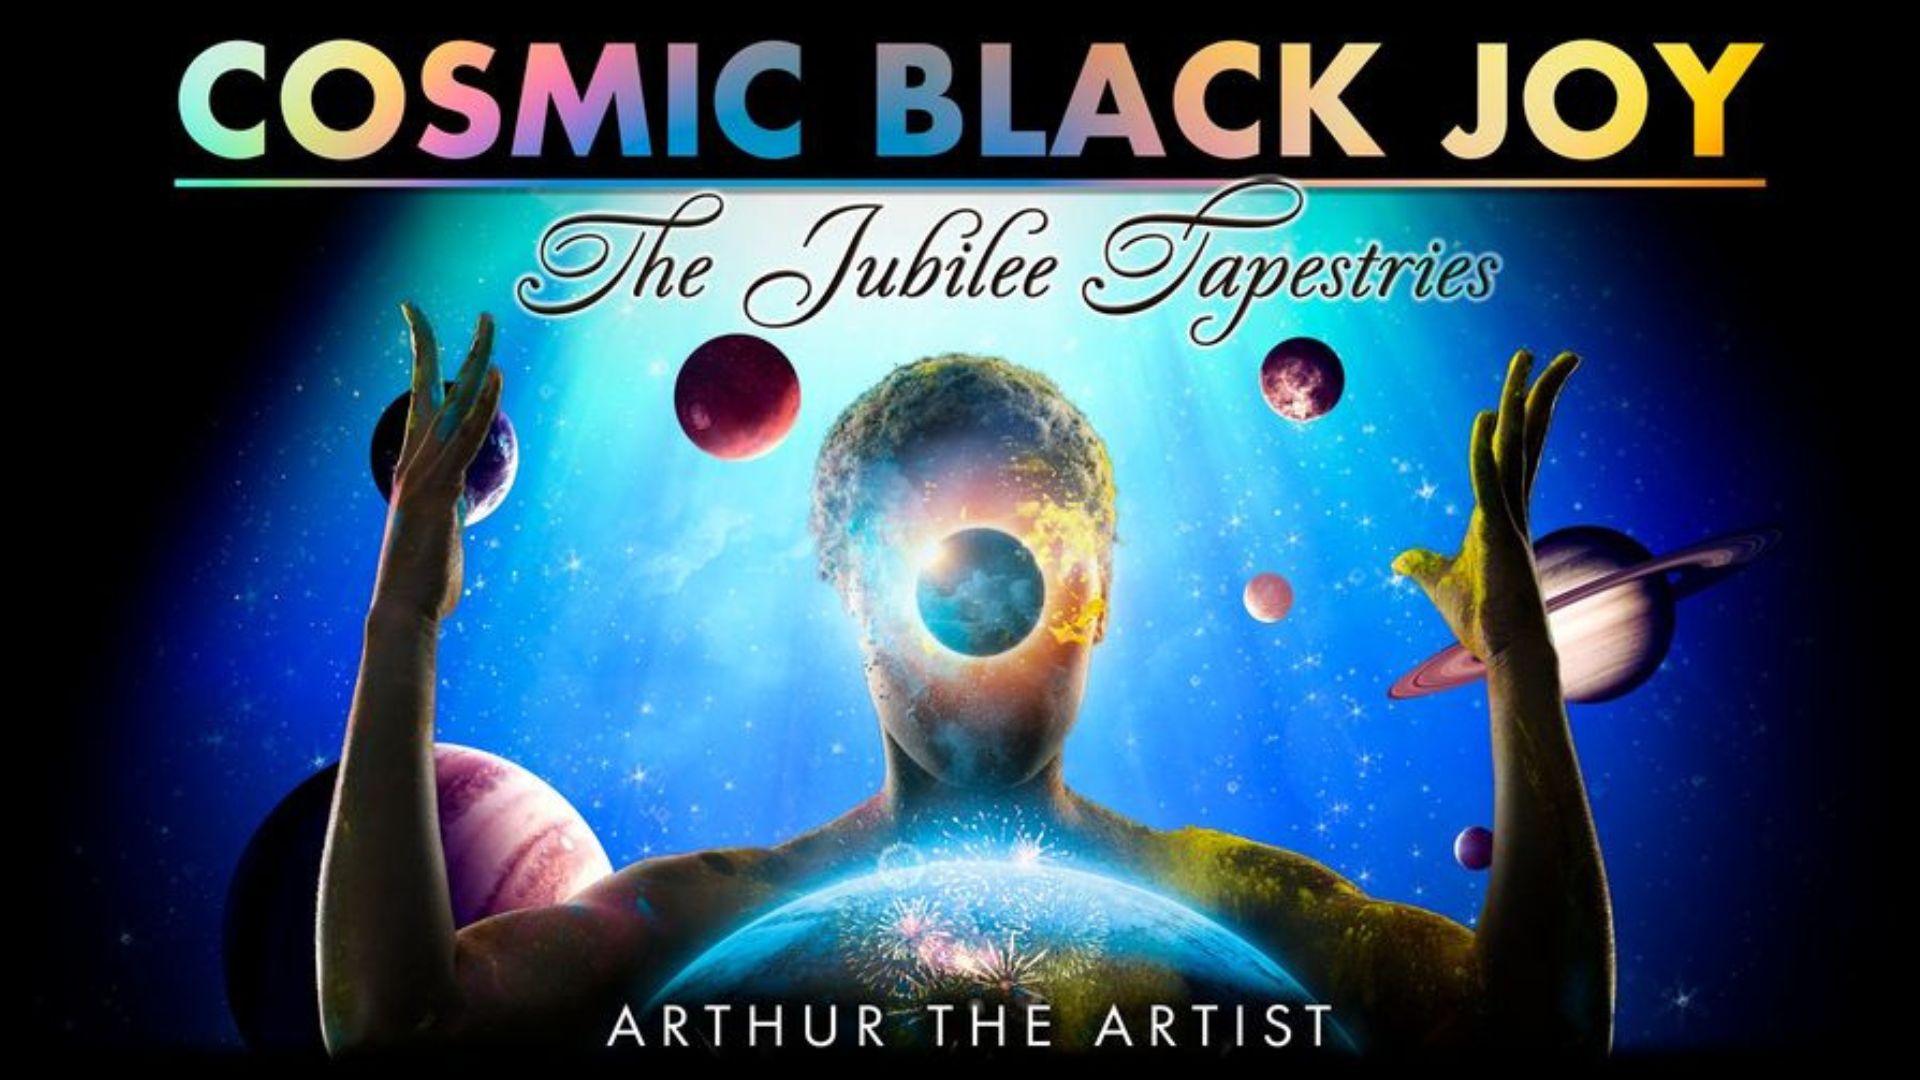 Cosmic Black Joy: The Jubilee Tapestries -- featuring a digital collage created by Arthur the Artist, with a black individual surrouned by the planets.